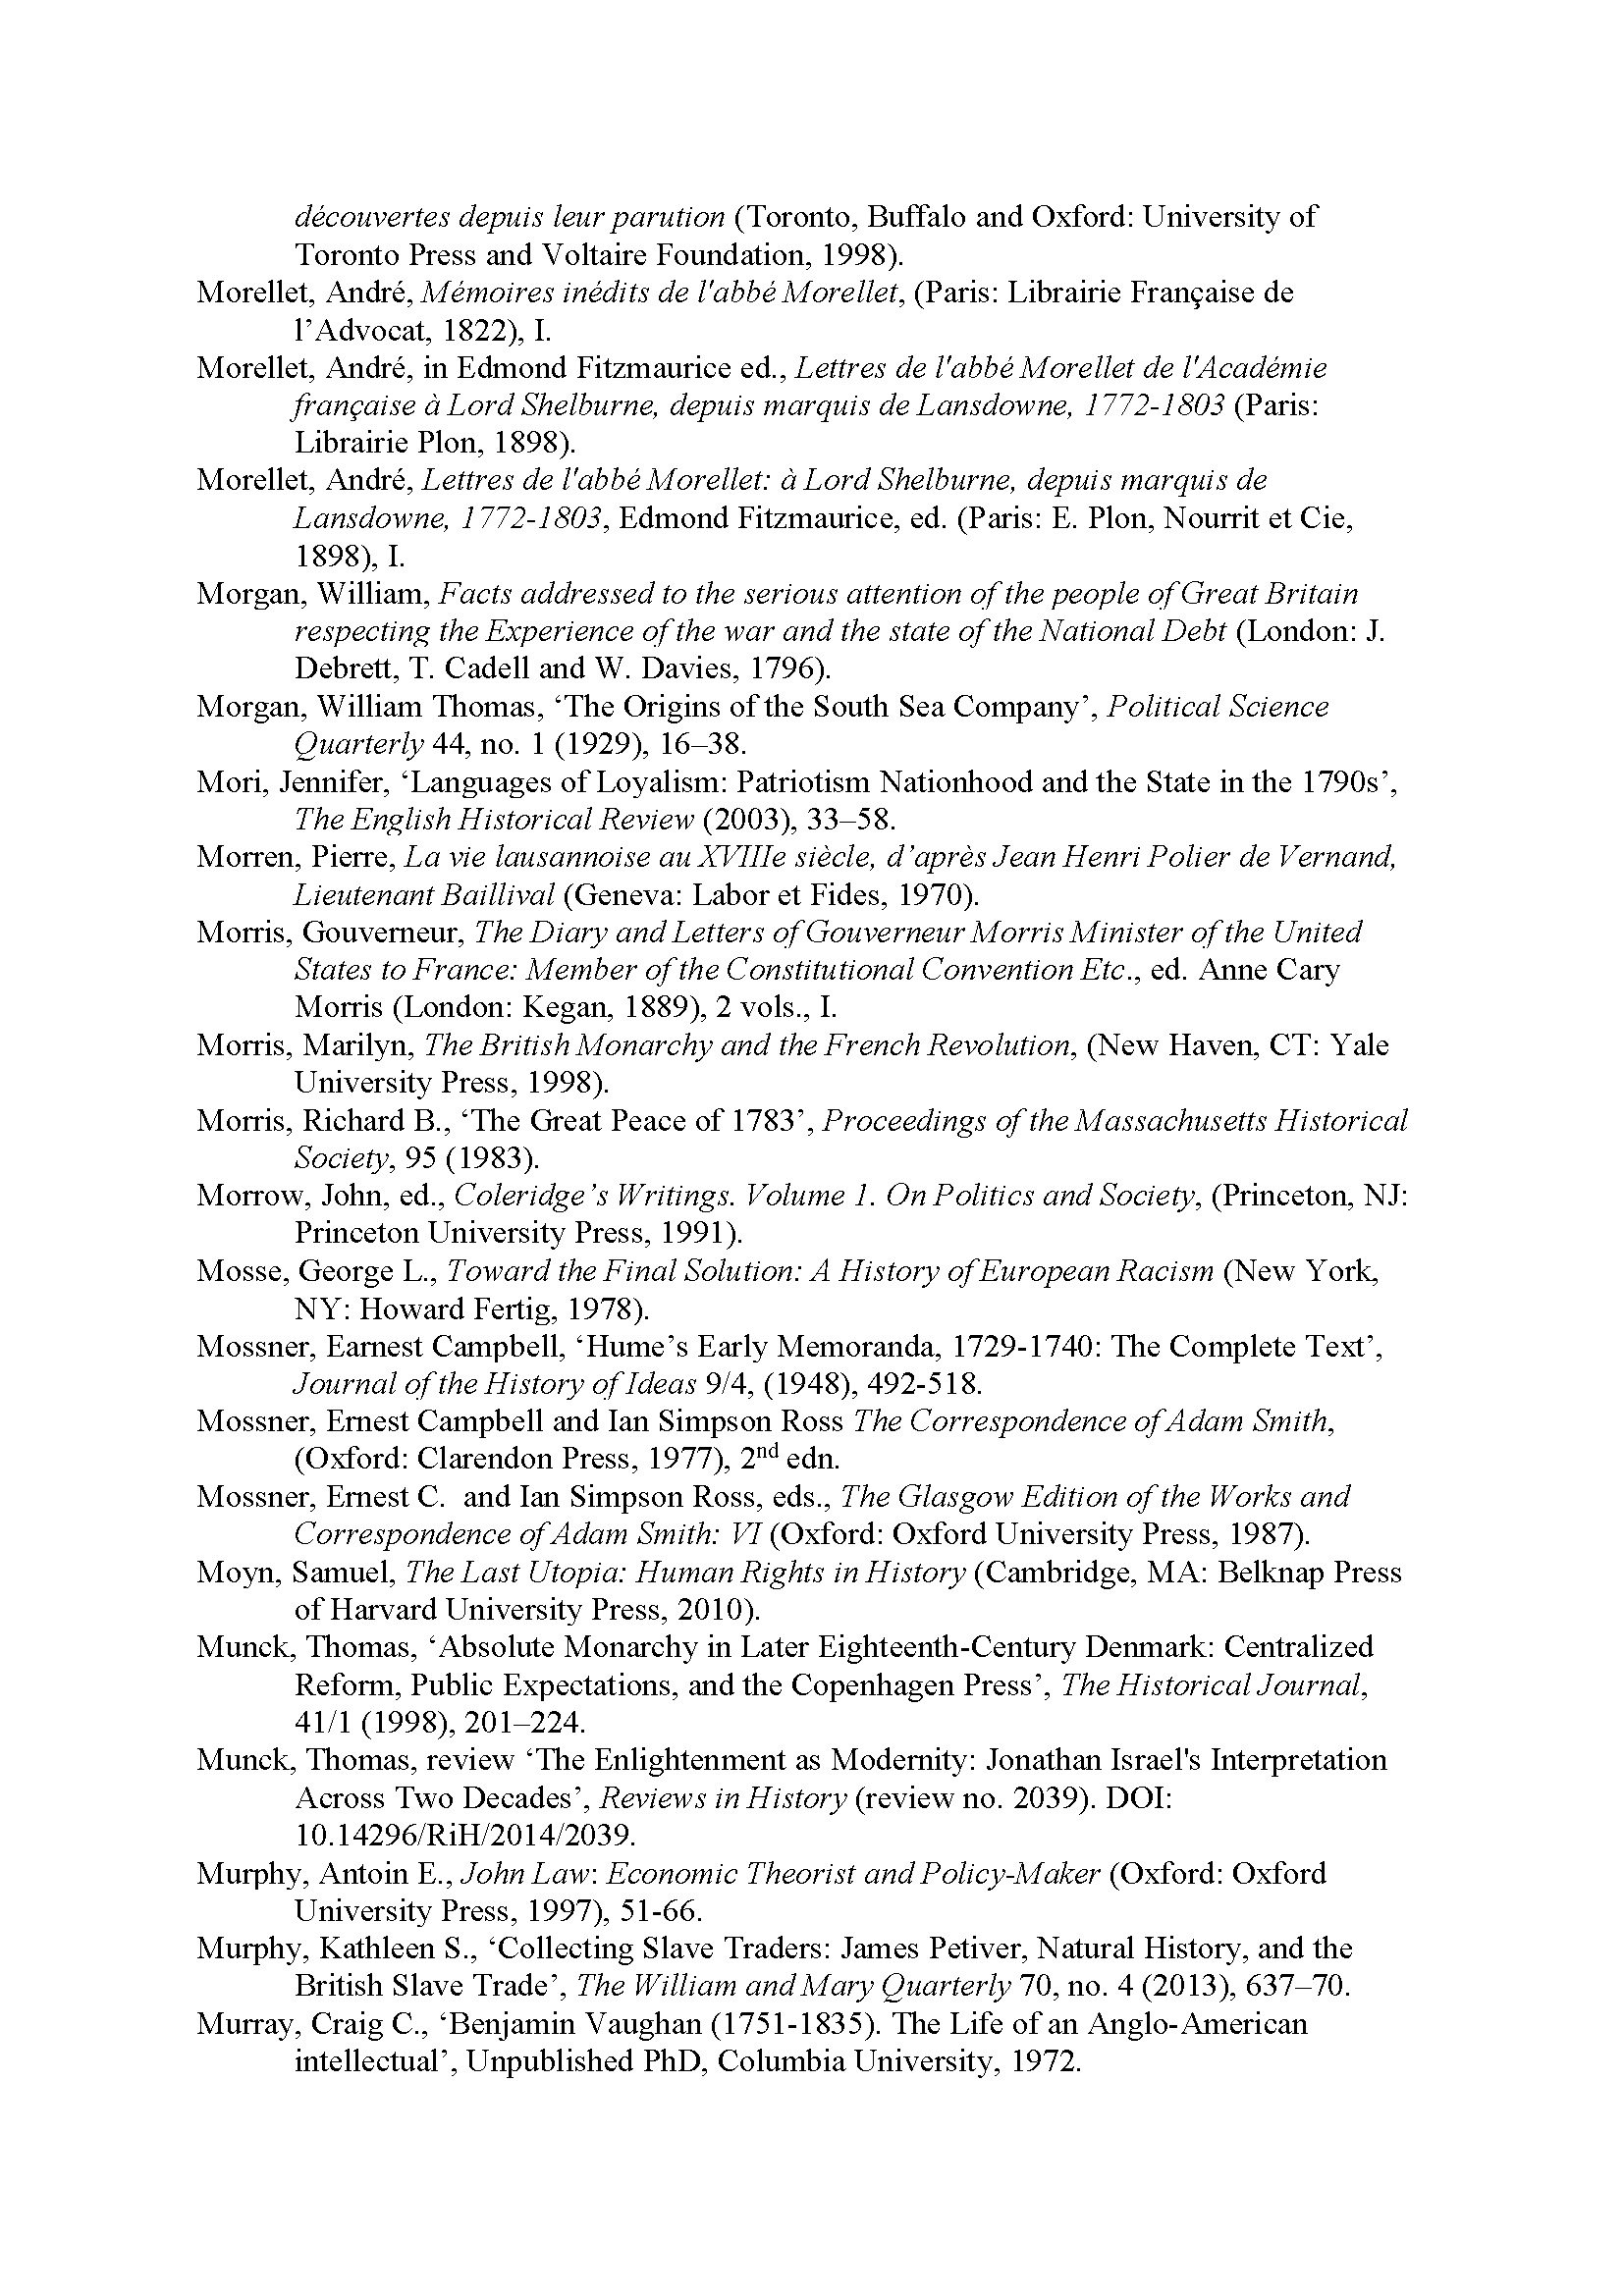 End of the Enlightment_Bibliography[25]_Page_32.jpg